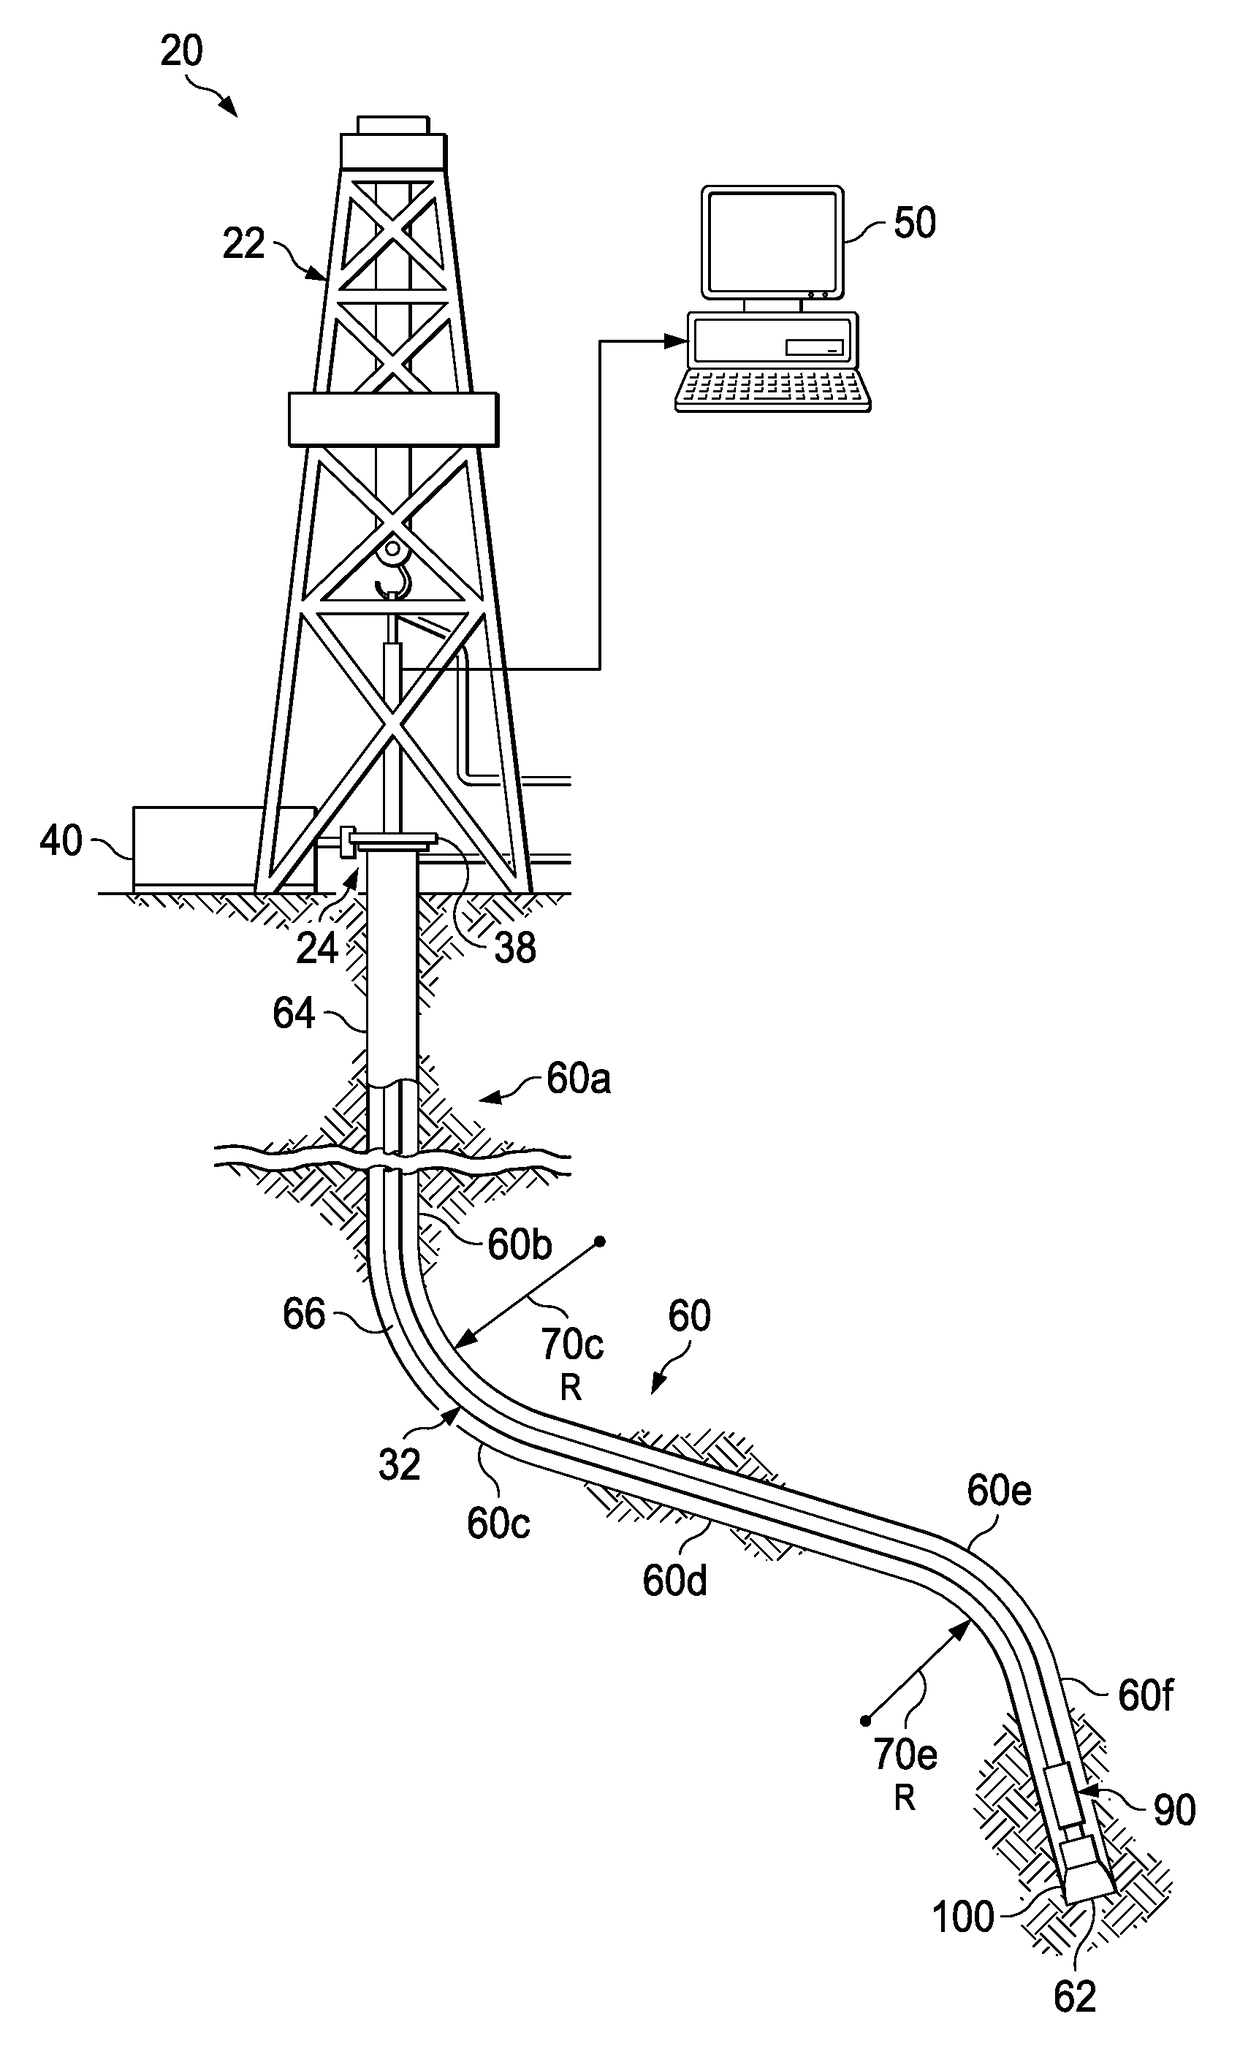 System and method for determining drilling parameters based on hydraulic pressure associated with a directional drilling system